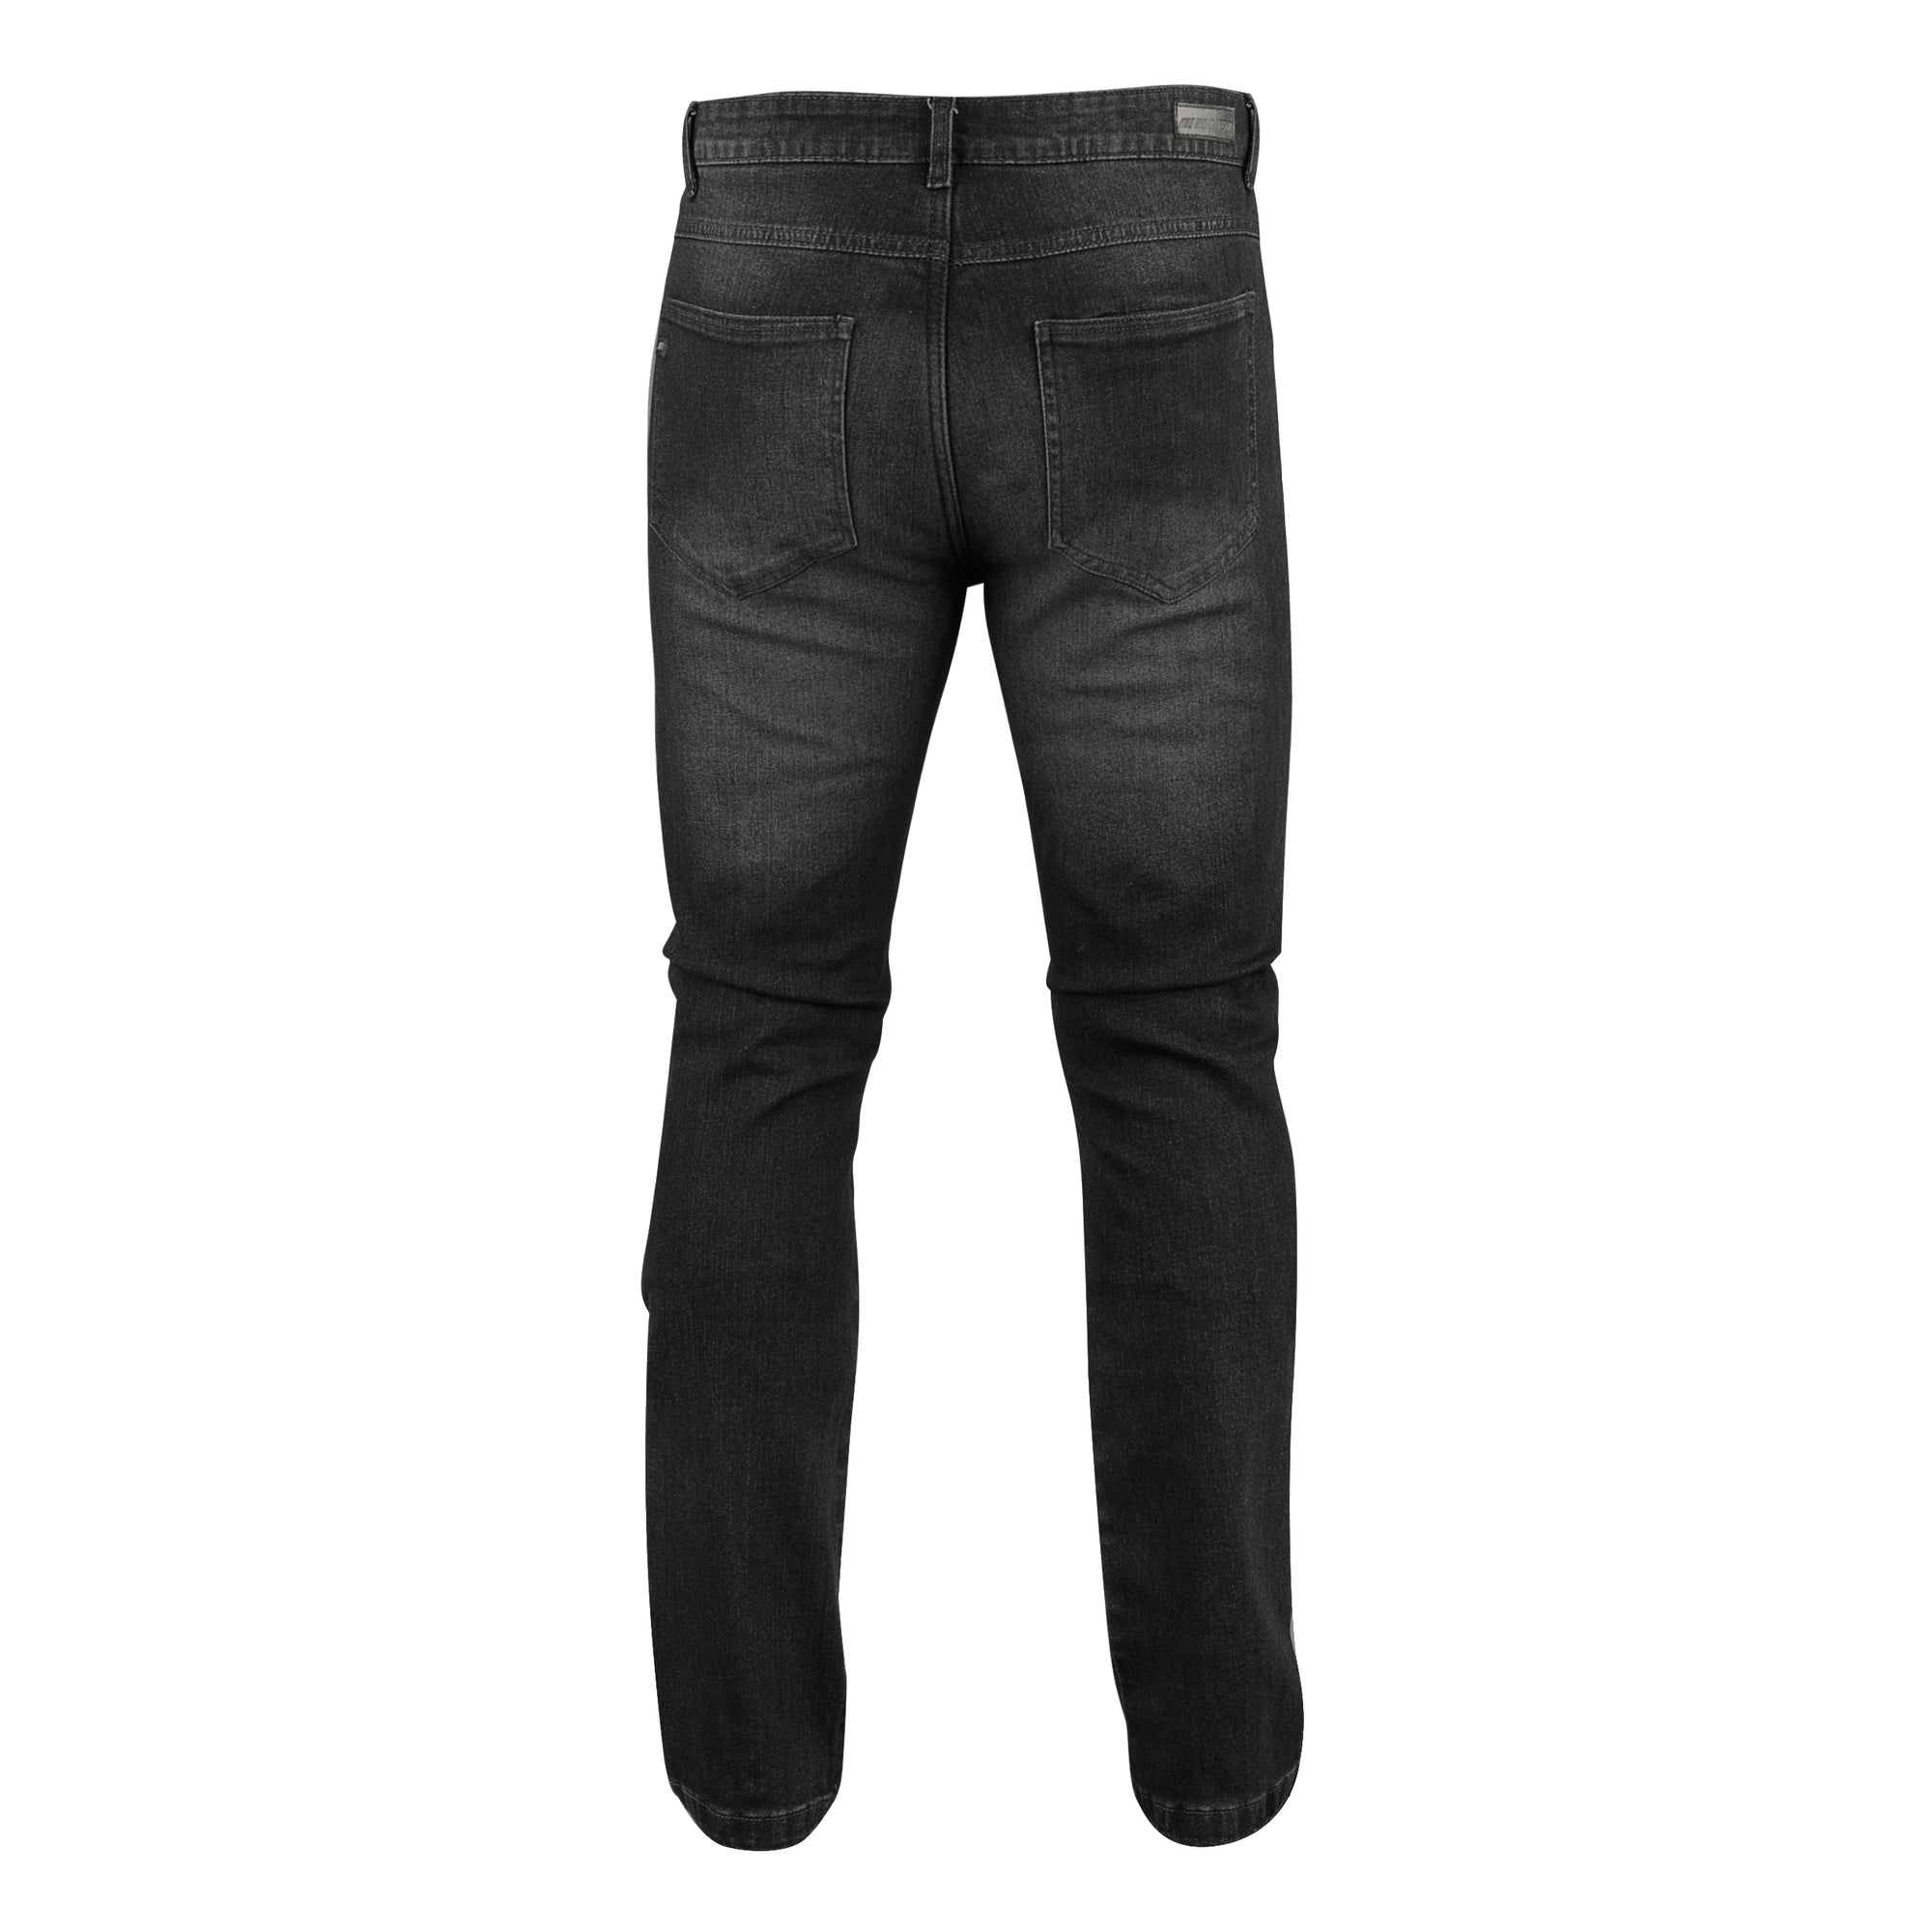 Tall Mens Jeans Made in USA 38 & 40-Inseams